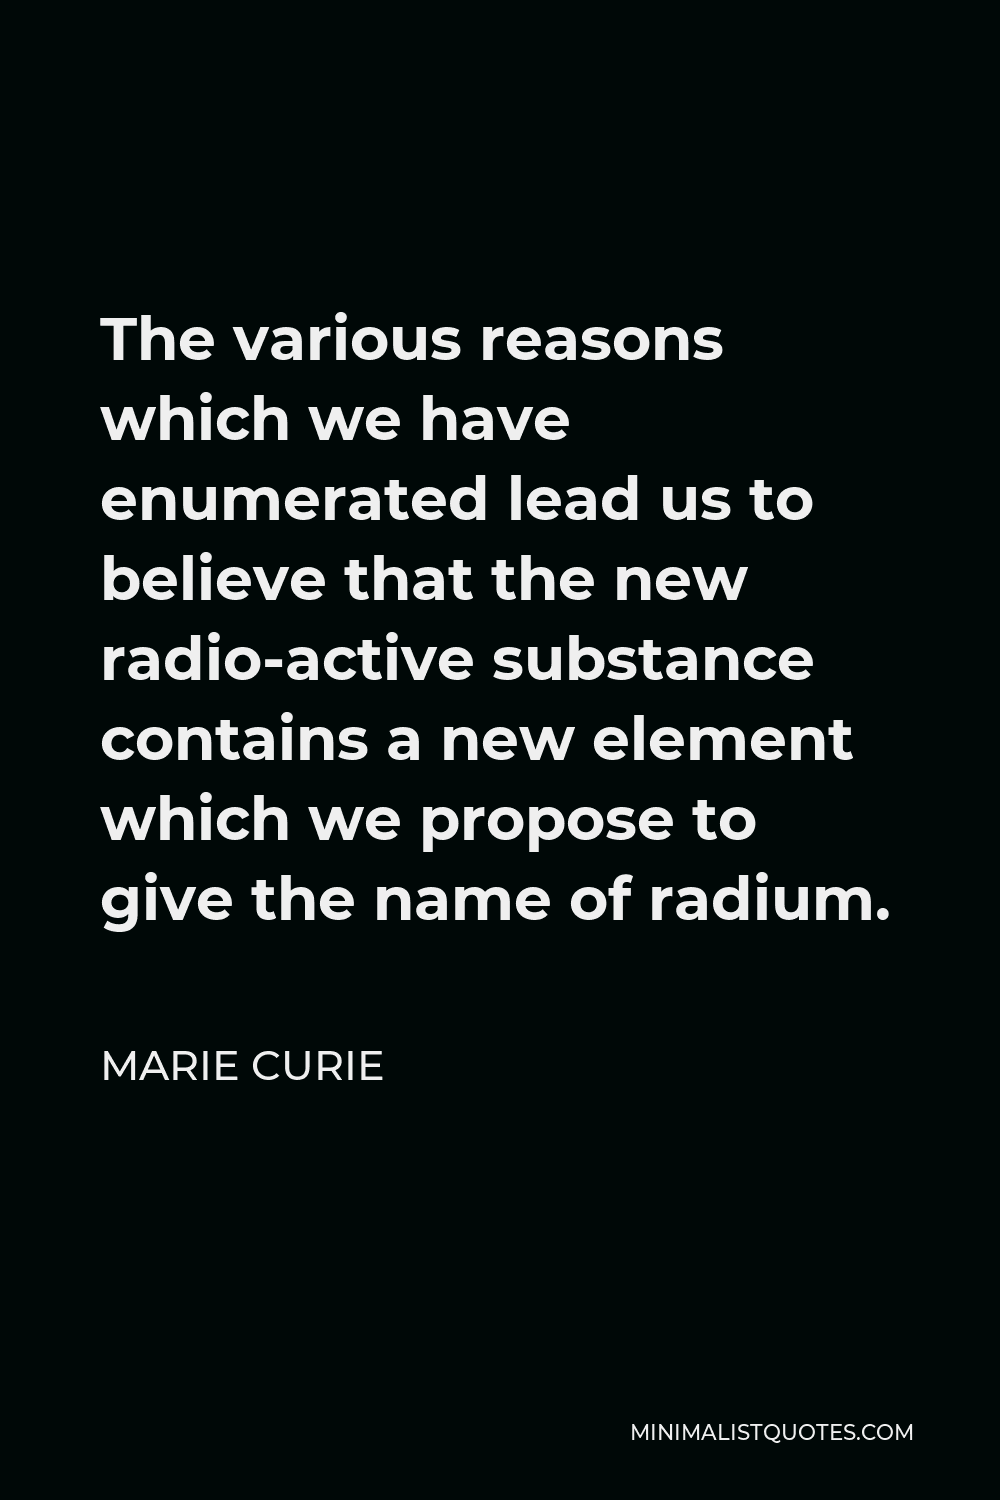 Marie Curie Quote - The various reasons which we have enumerated lead us to believe that the new radio-active substance contains a new element which we propose to give the name of radium.